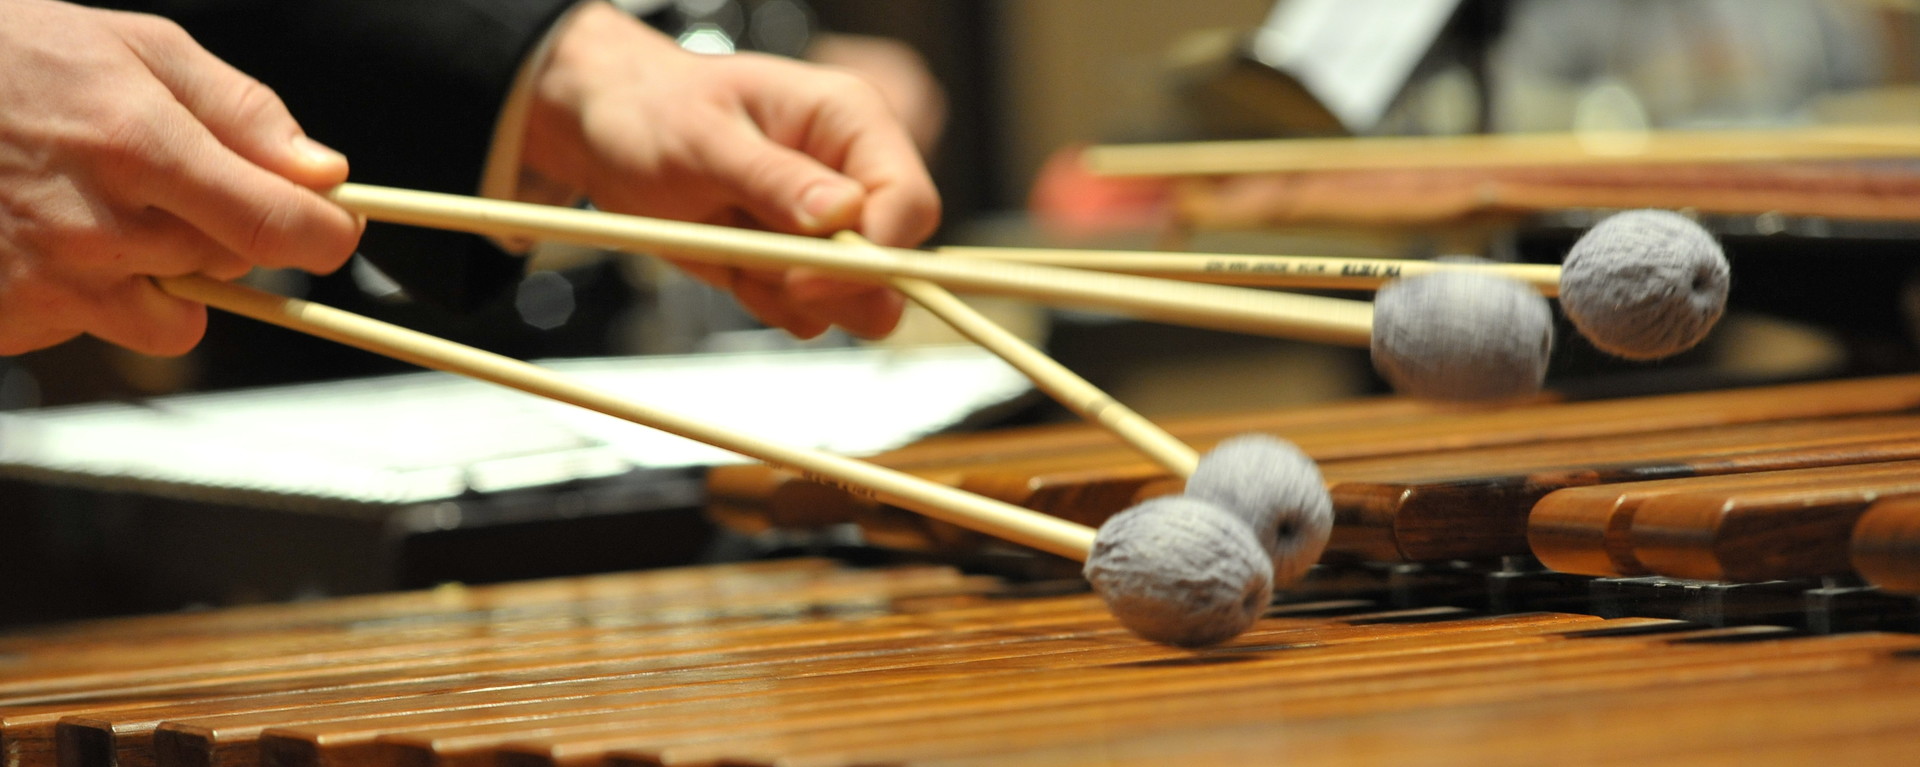 Closeup image of a person playing the xylophone